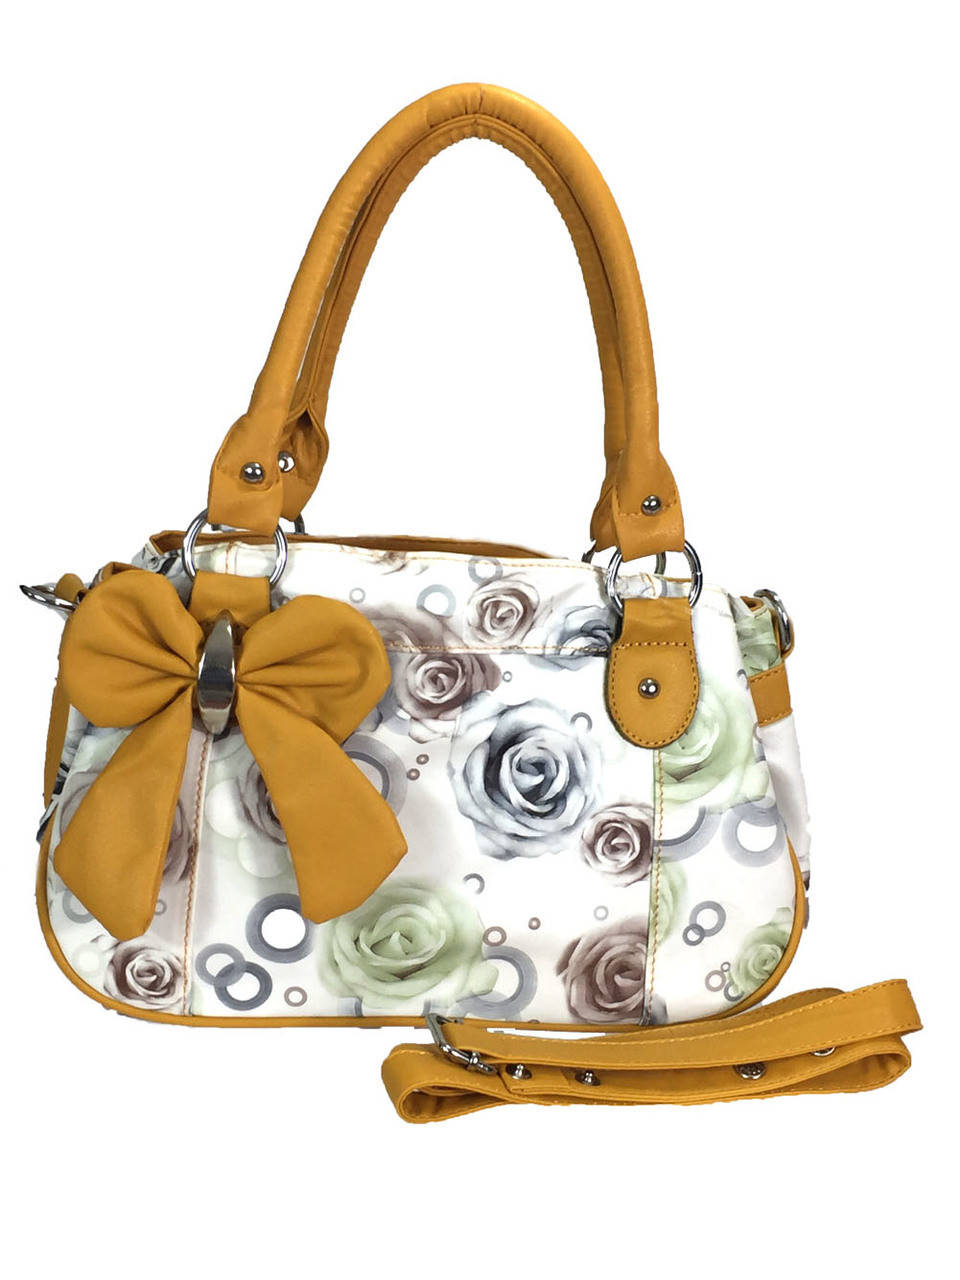 Small yellow Floral bag